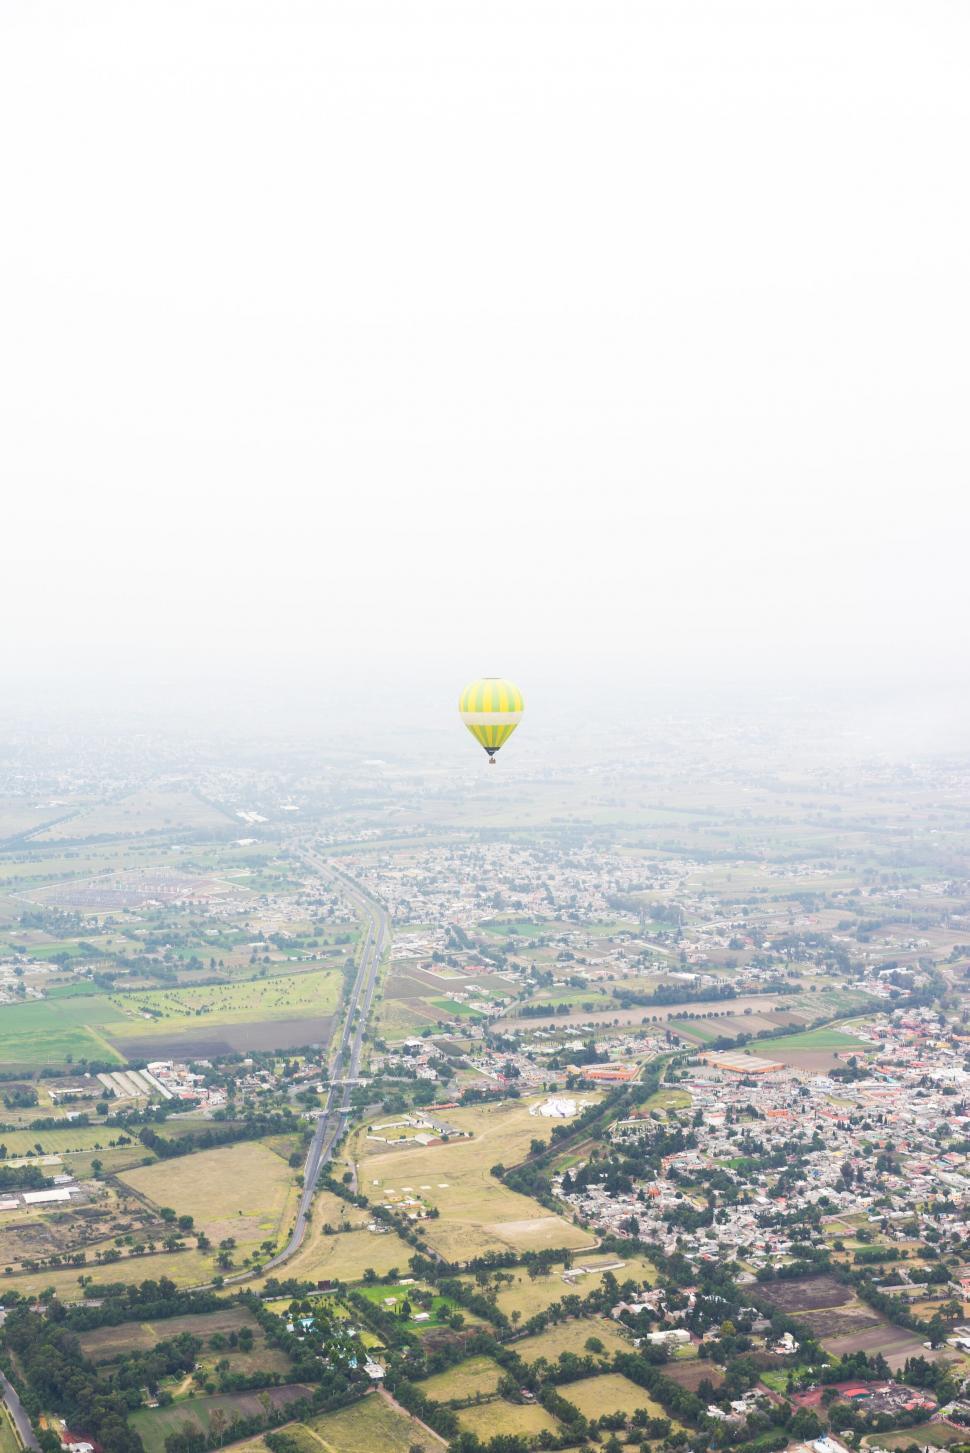 Free Image of Hot air balloon floating over rural landscape 